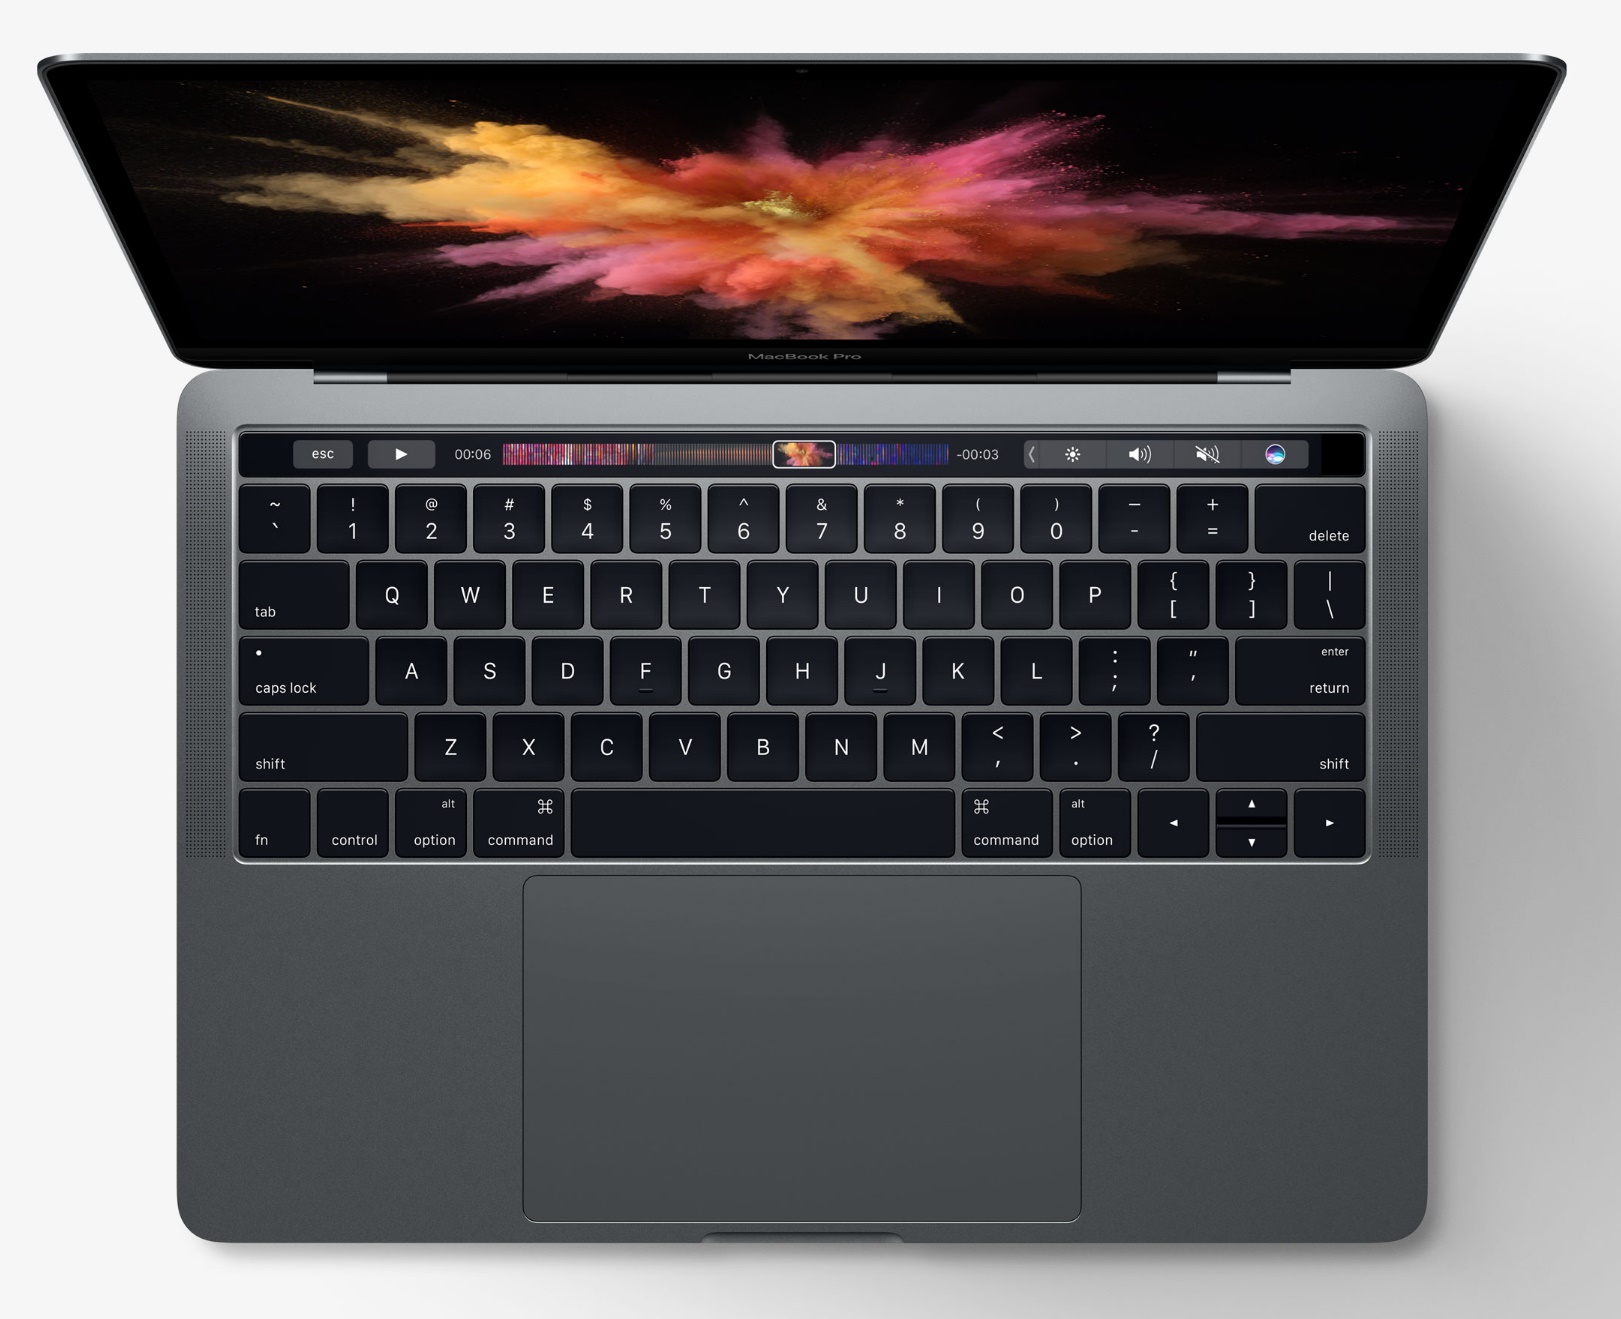 Introducing the new MacBook Pro with TouchBar